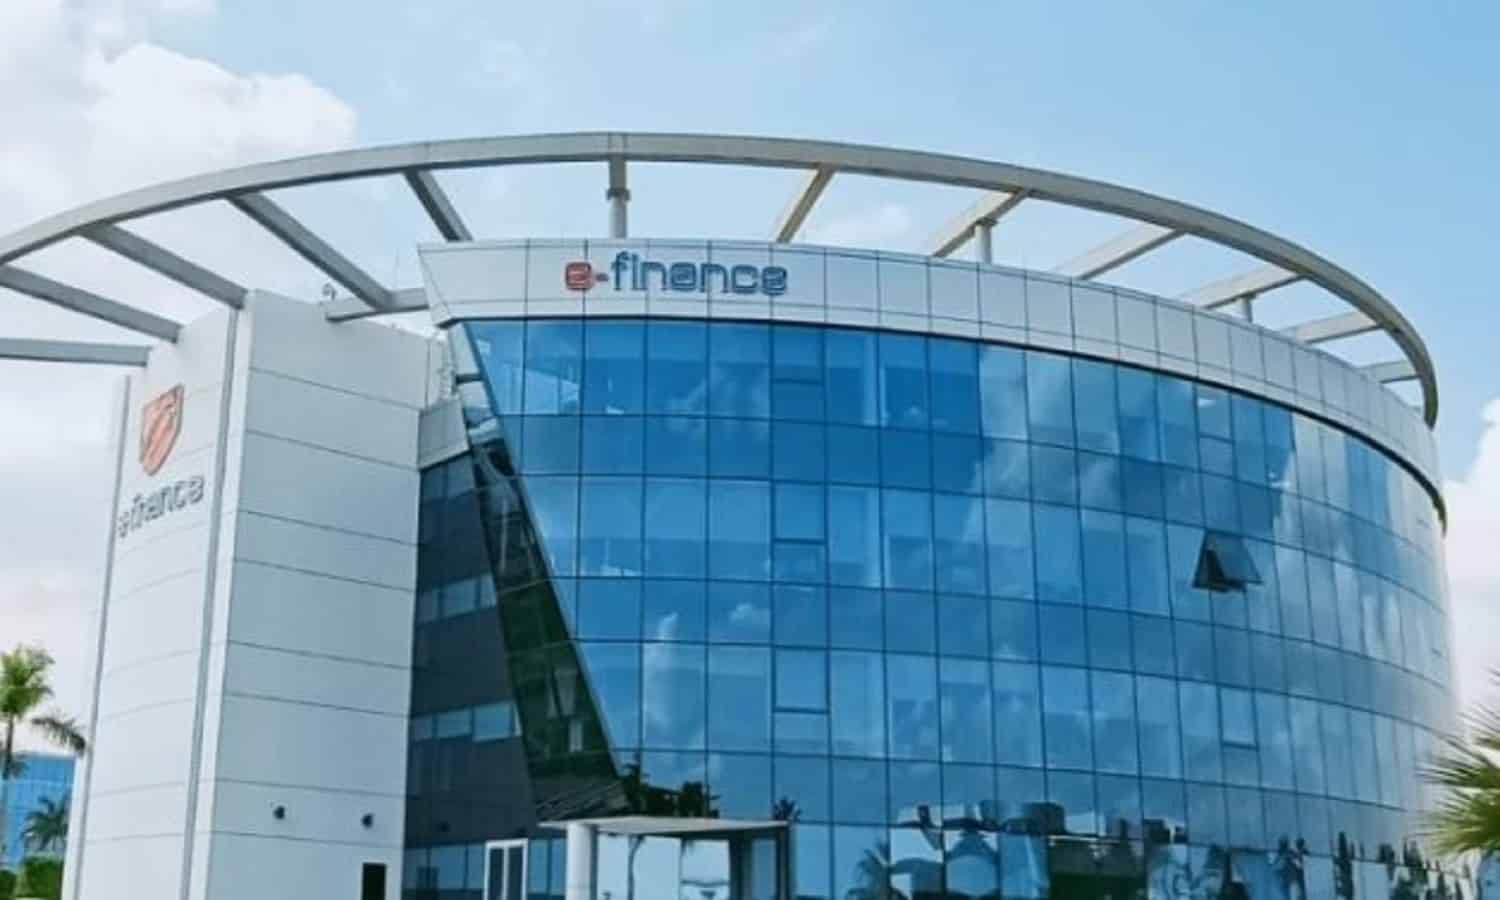 e-finance sees EGP 67.69M deal on issued shares under ESOP

